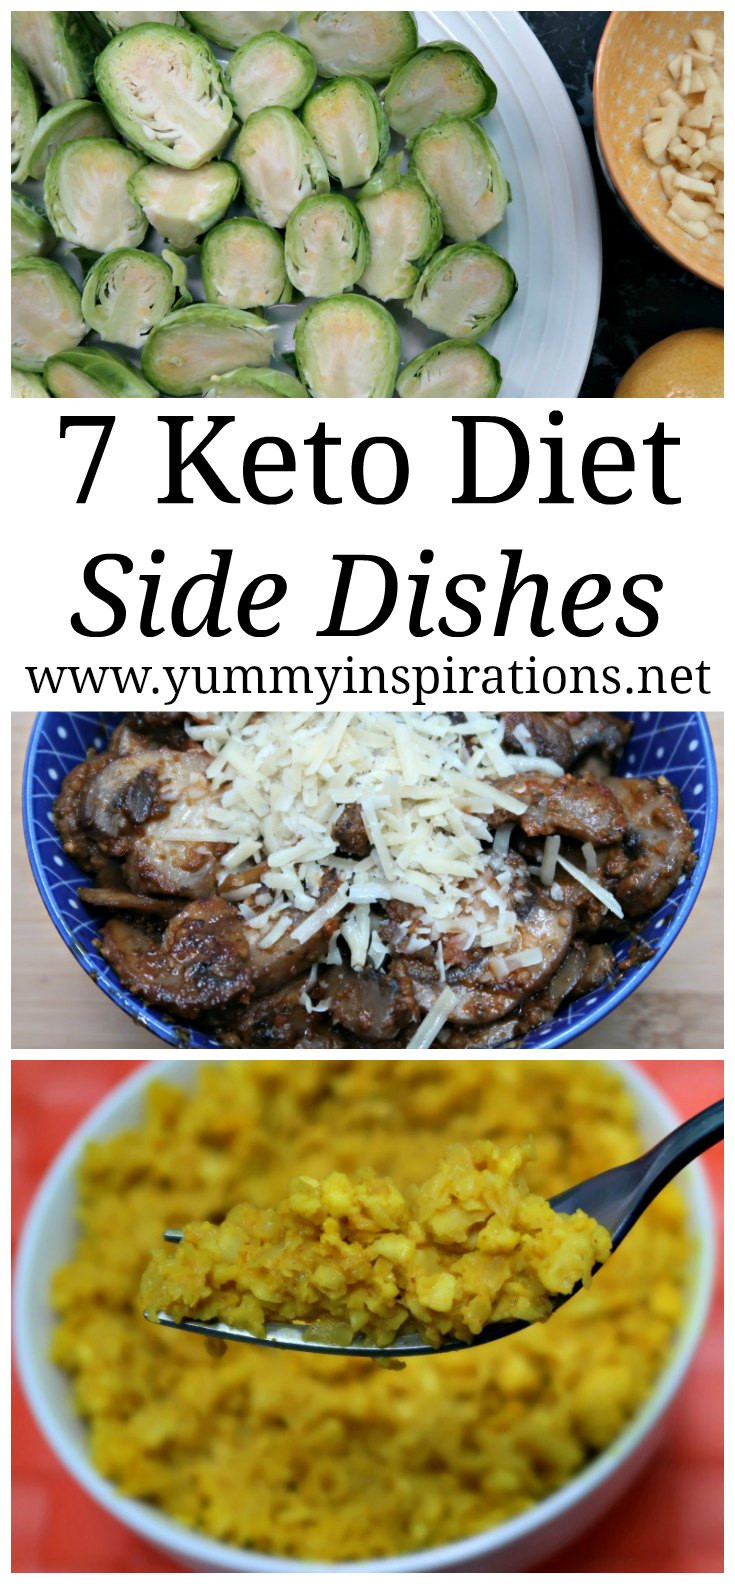 Keto Dinner Sides
 7 Keto Side Dishes Easy Low Carb Sides LCHF Recipes